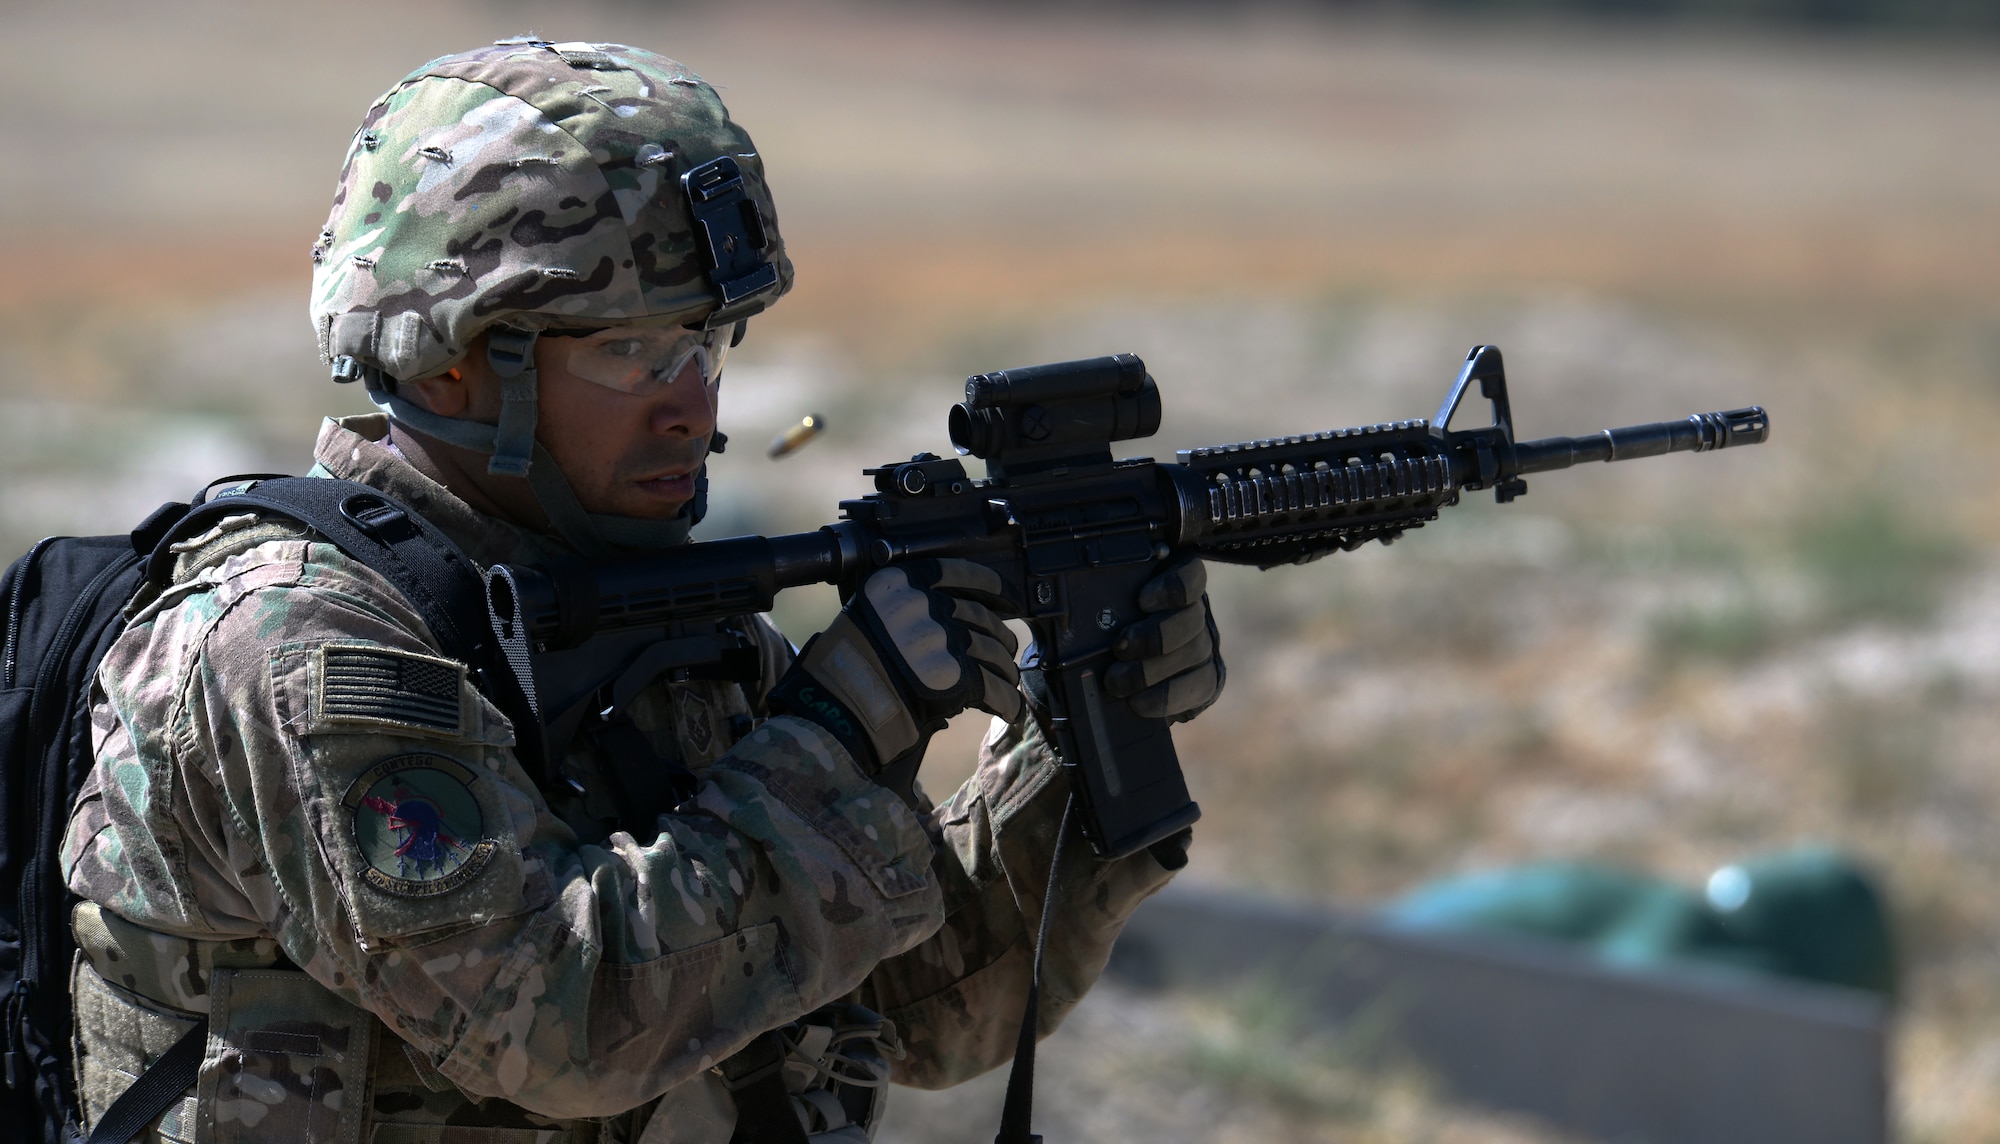 Master Sgt. Jason Garo, 5th Bomb Wing, Minot Air Force Base, N.D., watches a casing fly away from his M-4 assault rifle Sept. 23, 2015, during the shooting range portion of the 2015 Global Strike Challenge security forces competition on Camp Guernsey, Wyo. Competitors scored points based on the number of targets they hit as well as how quickly they finished the course. (U.S. Air Force photo by Senior Airman Brandon Valle)